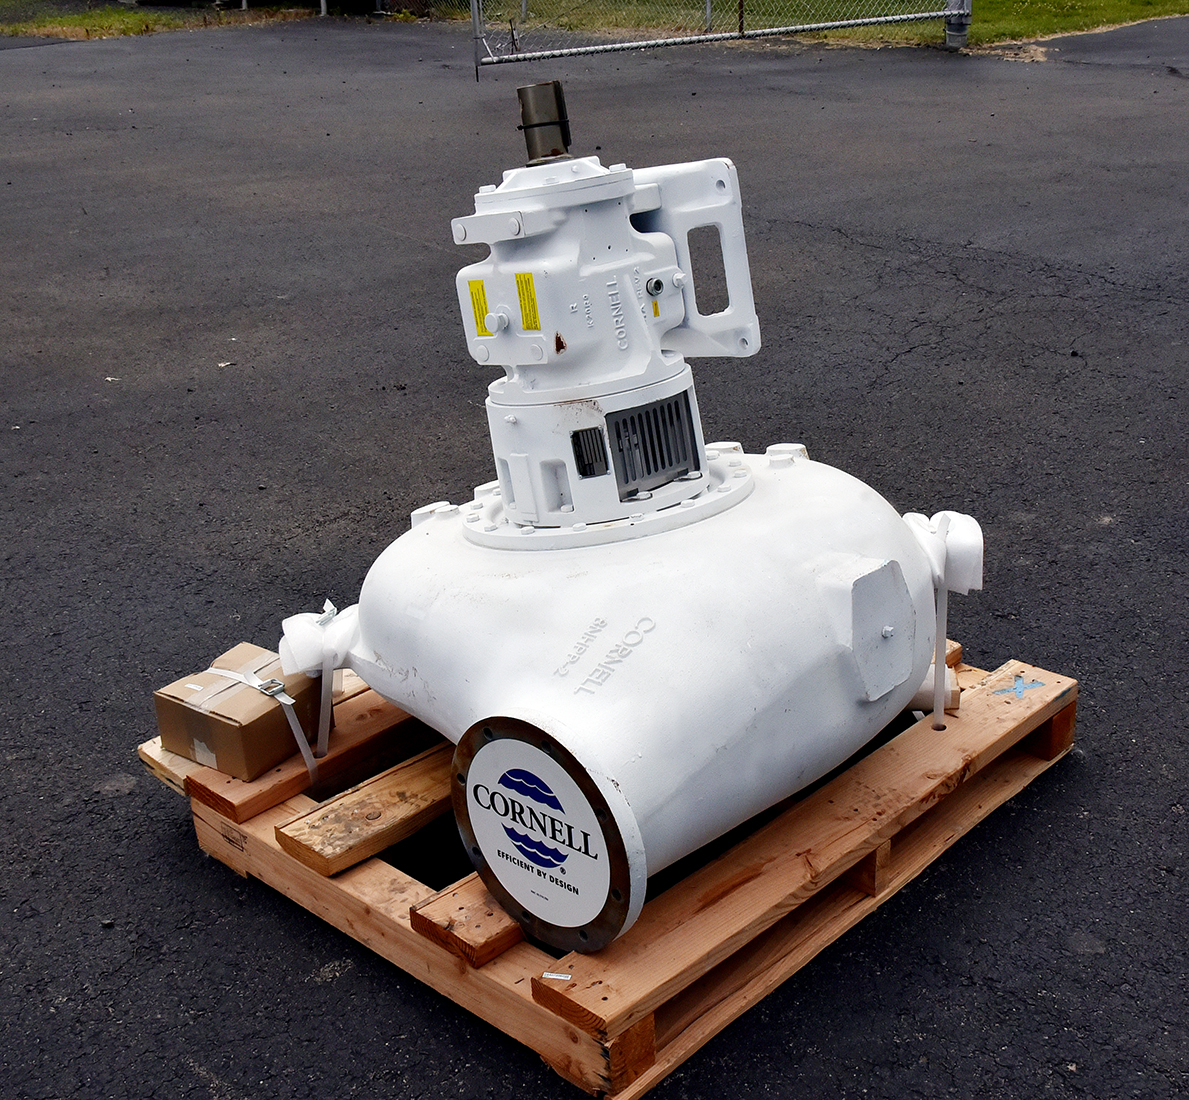 Cornell 8 inch FOOD PUMP, Model 8NHPP-F18K, expanded volute, for delicate products, Alard Equipment Corp item Y4997